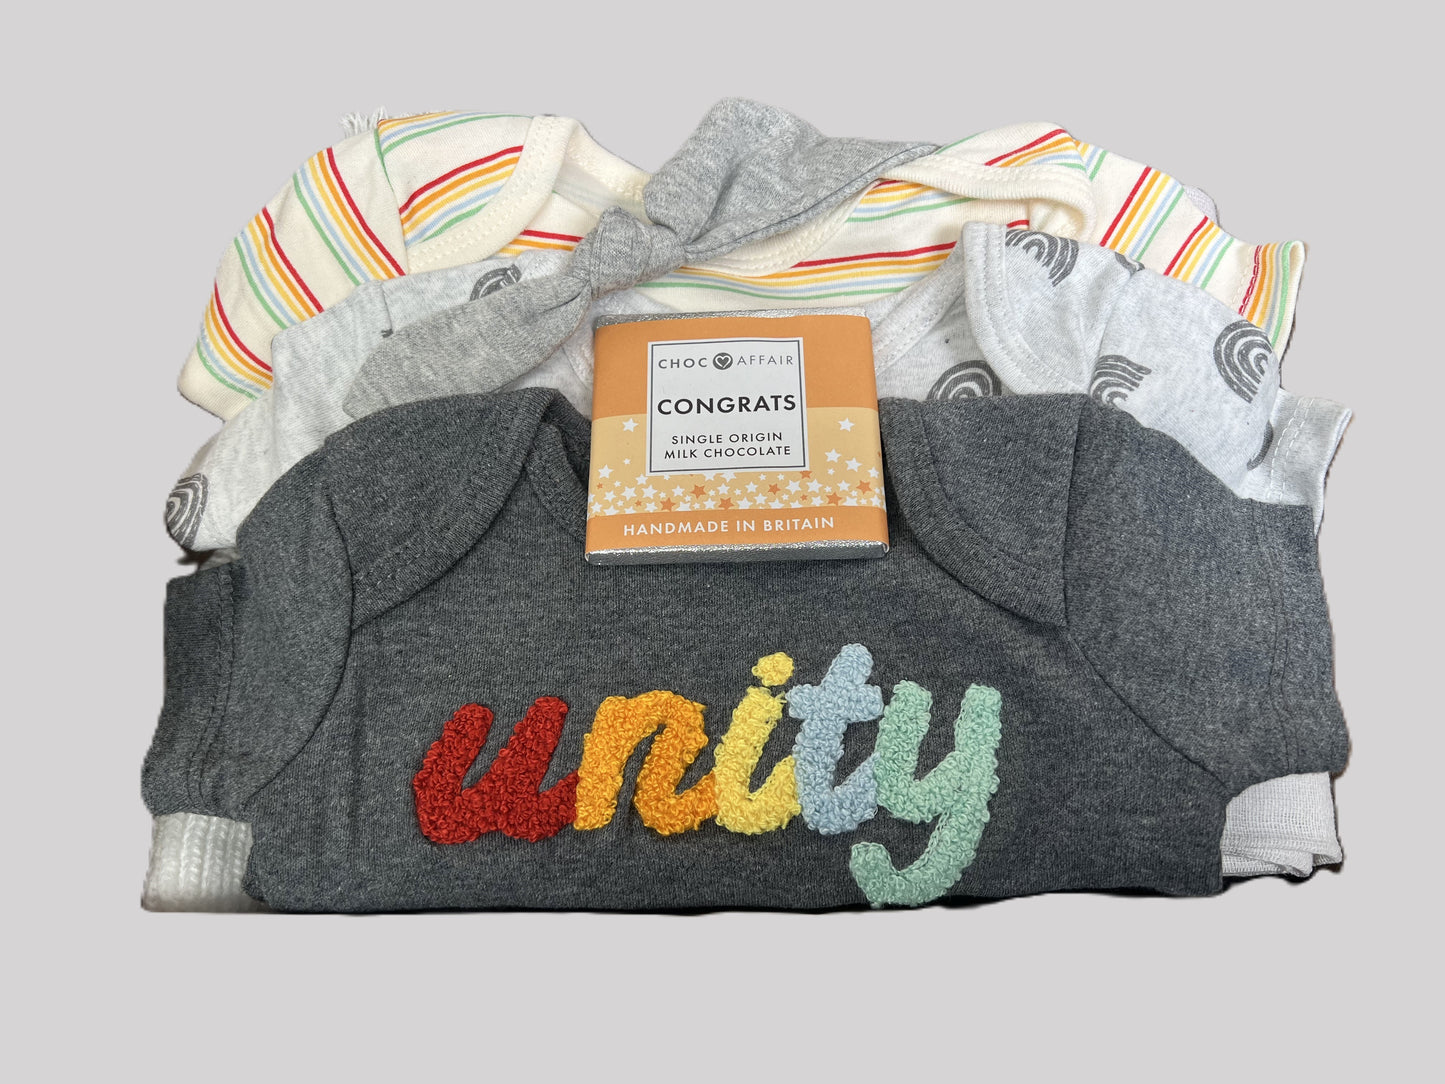 Unisex organic cotton new baby gift with 3 organic cooton baby bodysuits, a wooden elephant push along toy, a grey baby knot hat, a muslin square a baby pompom hat, a grey cellular baby blanket and a bar of chocolate.